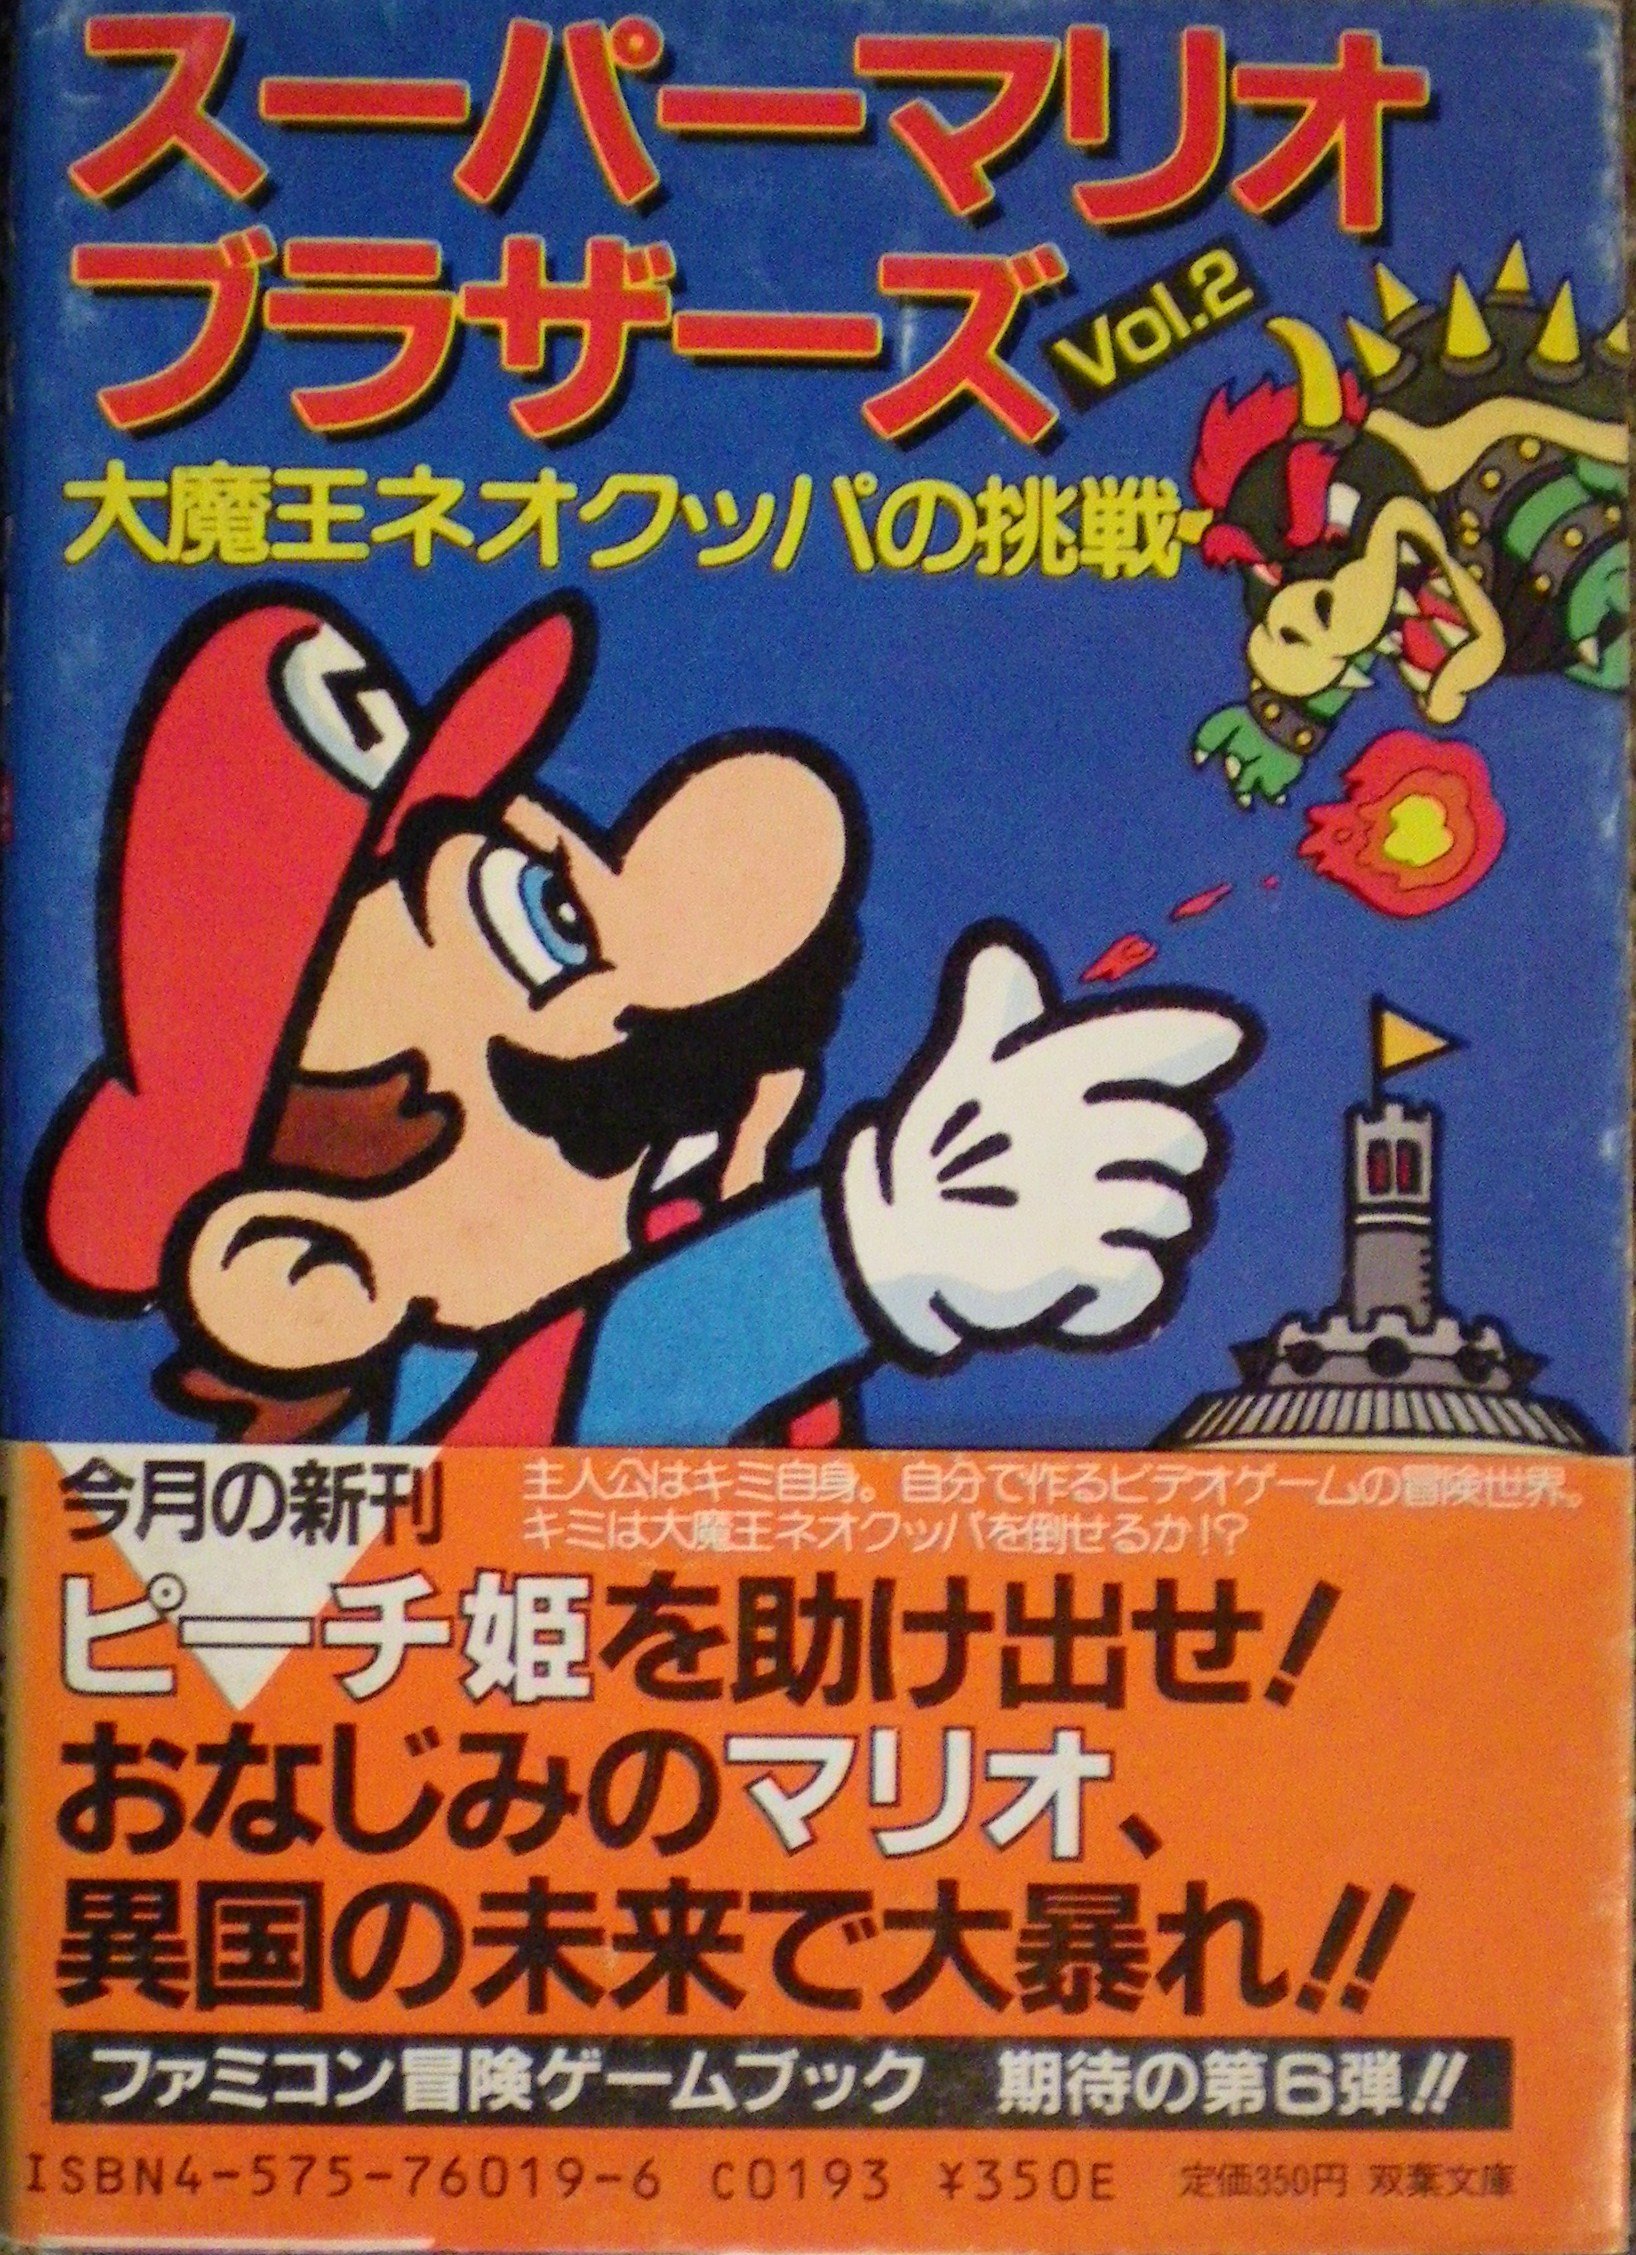 japanese-collectors-list/famicon-adventure-gamebook/gallery.md at